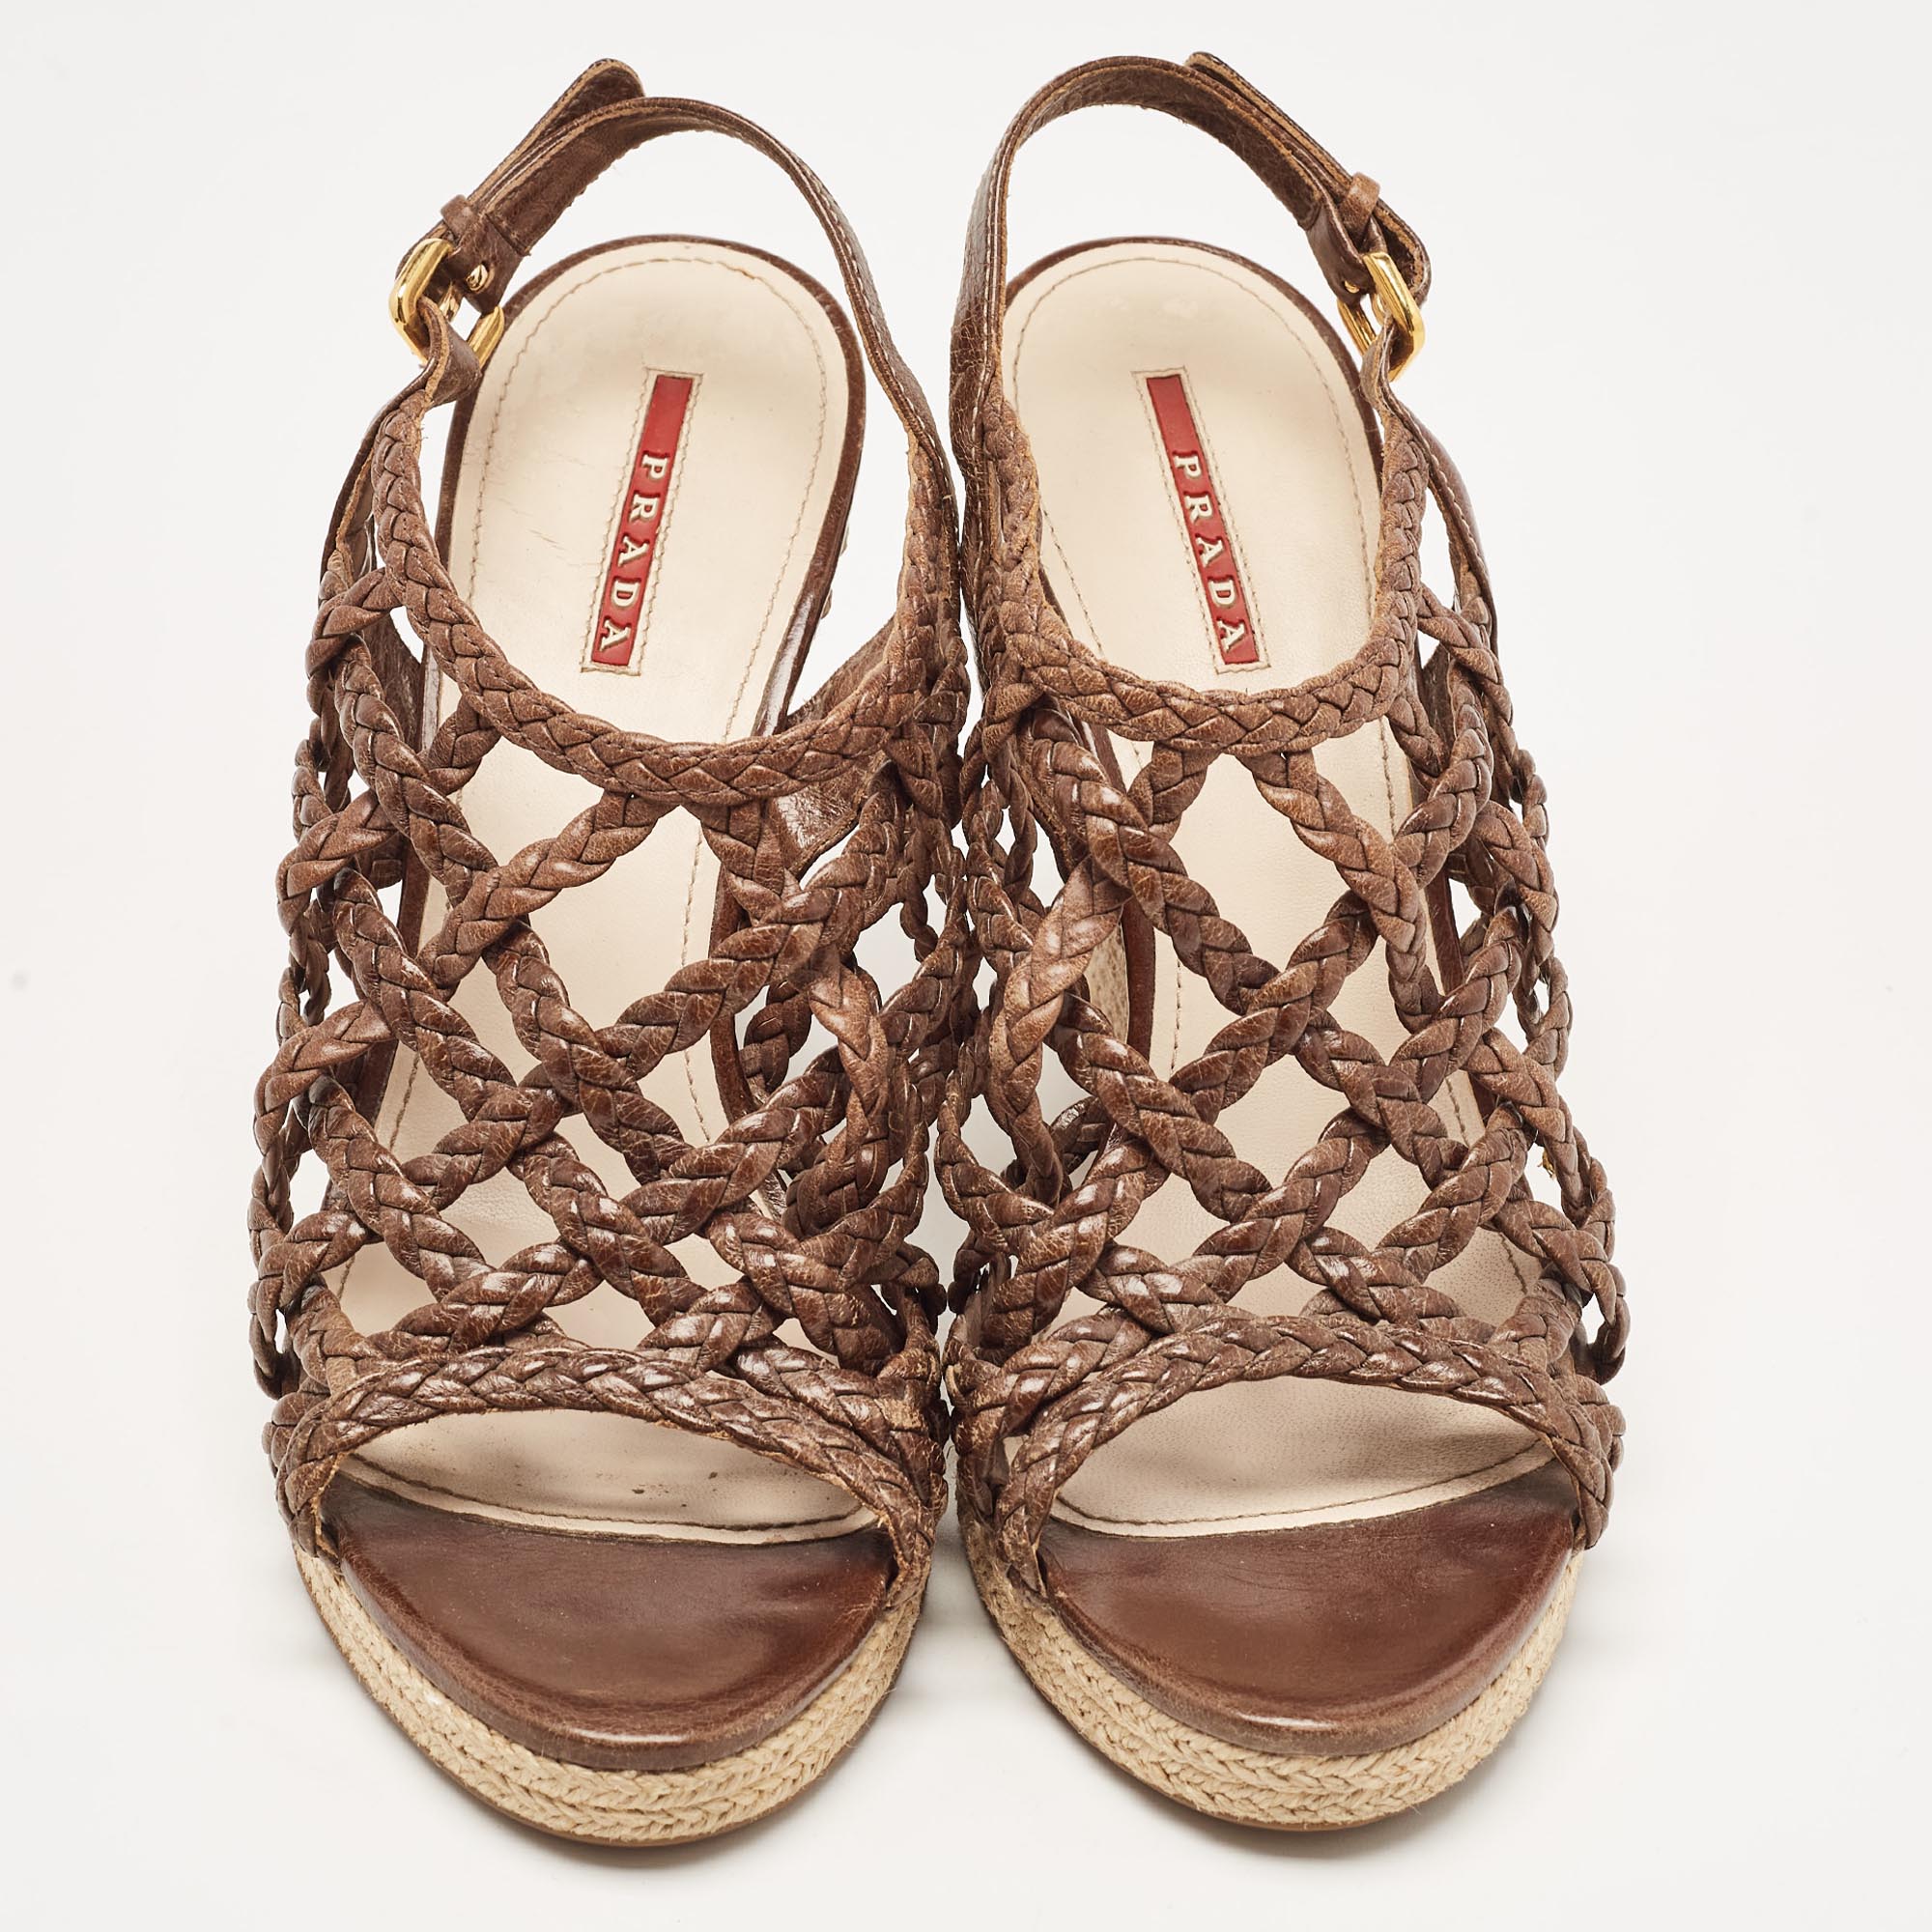 Prada Sport Brown Leather Braided Accents Wedge Espadrilles  Sandals Size 40.5